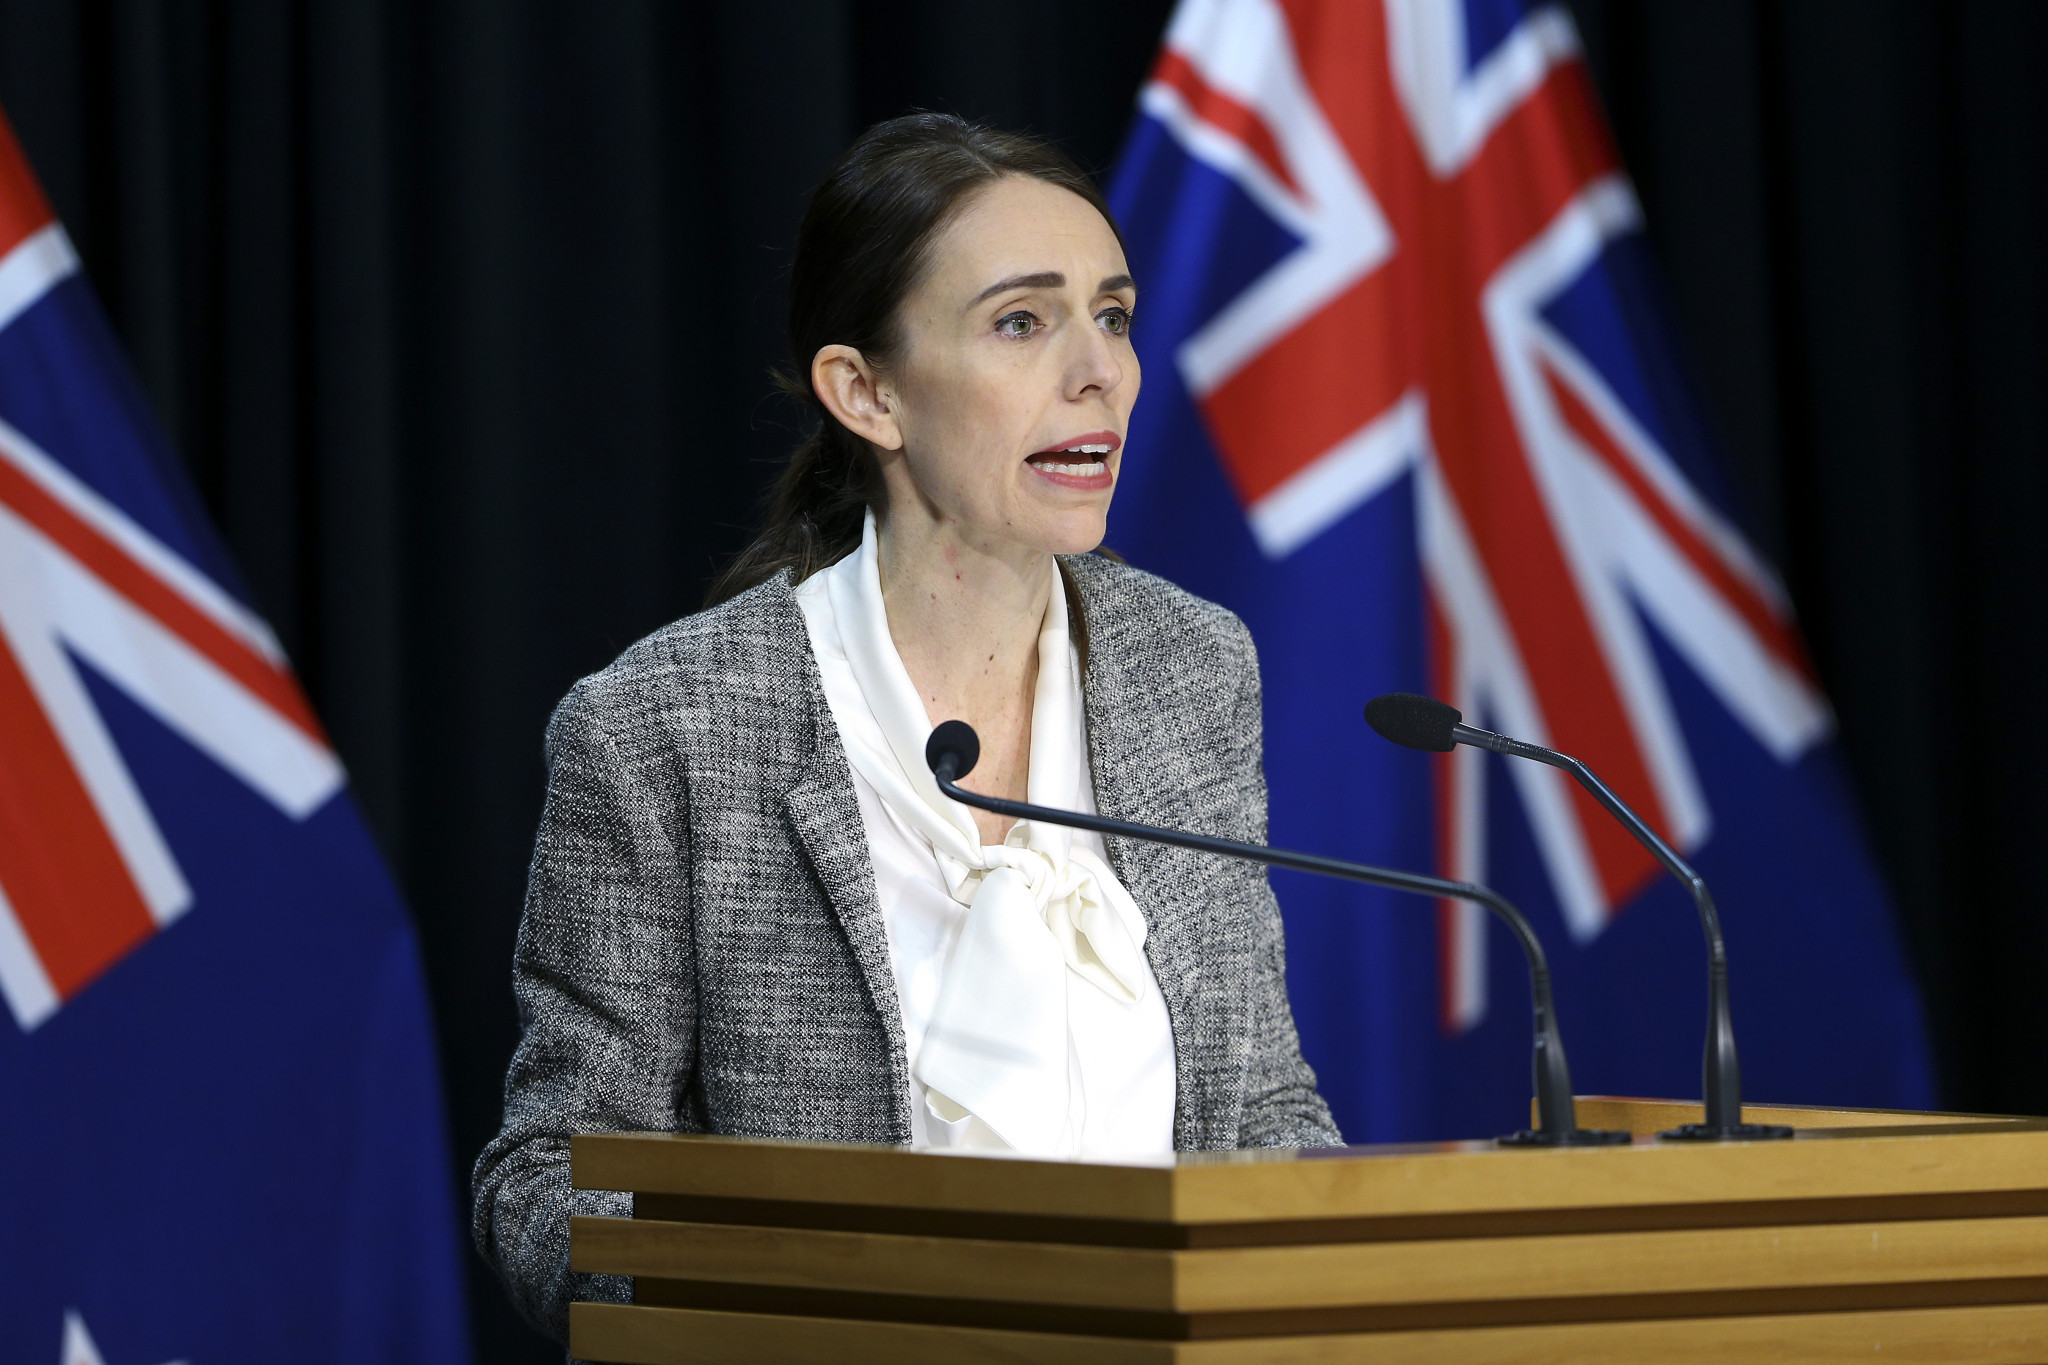 New Zealand's Prime Minister Jacinda Ardern wrote a joint letter with Australian Prime Minister Scott Morrison to the FIFA Council ©Getty Images